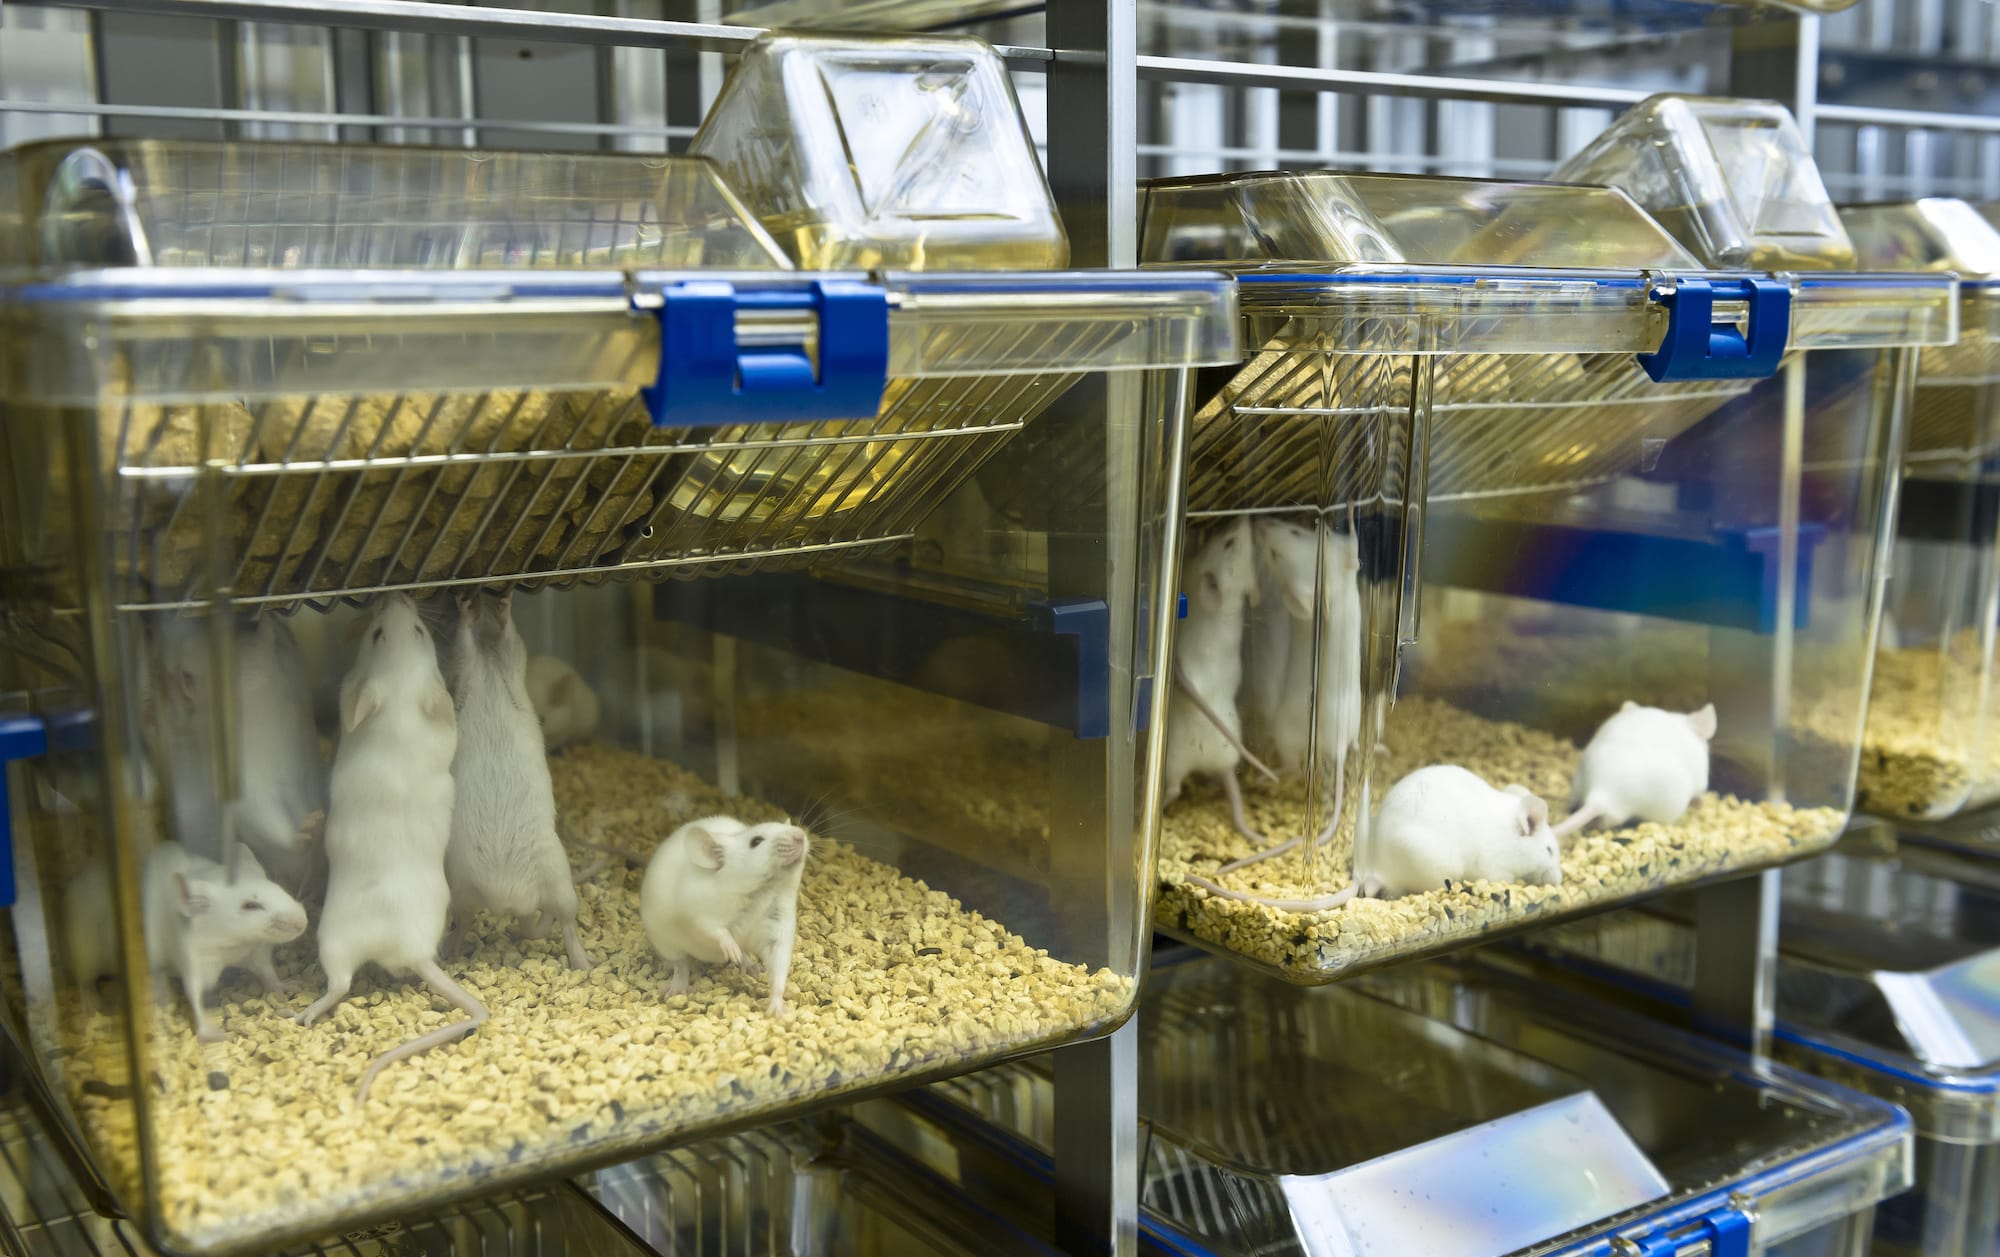 Image shows mice in cages in a laboratory.